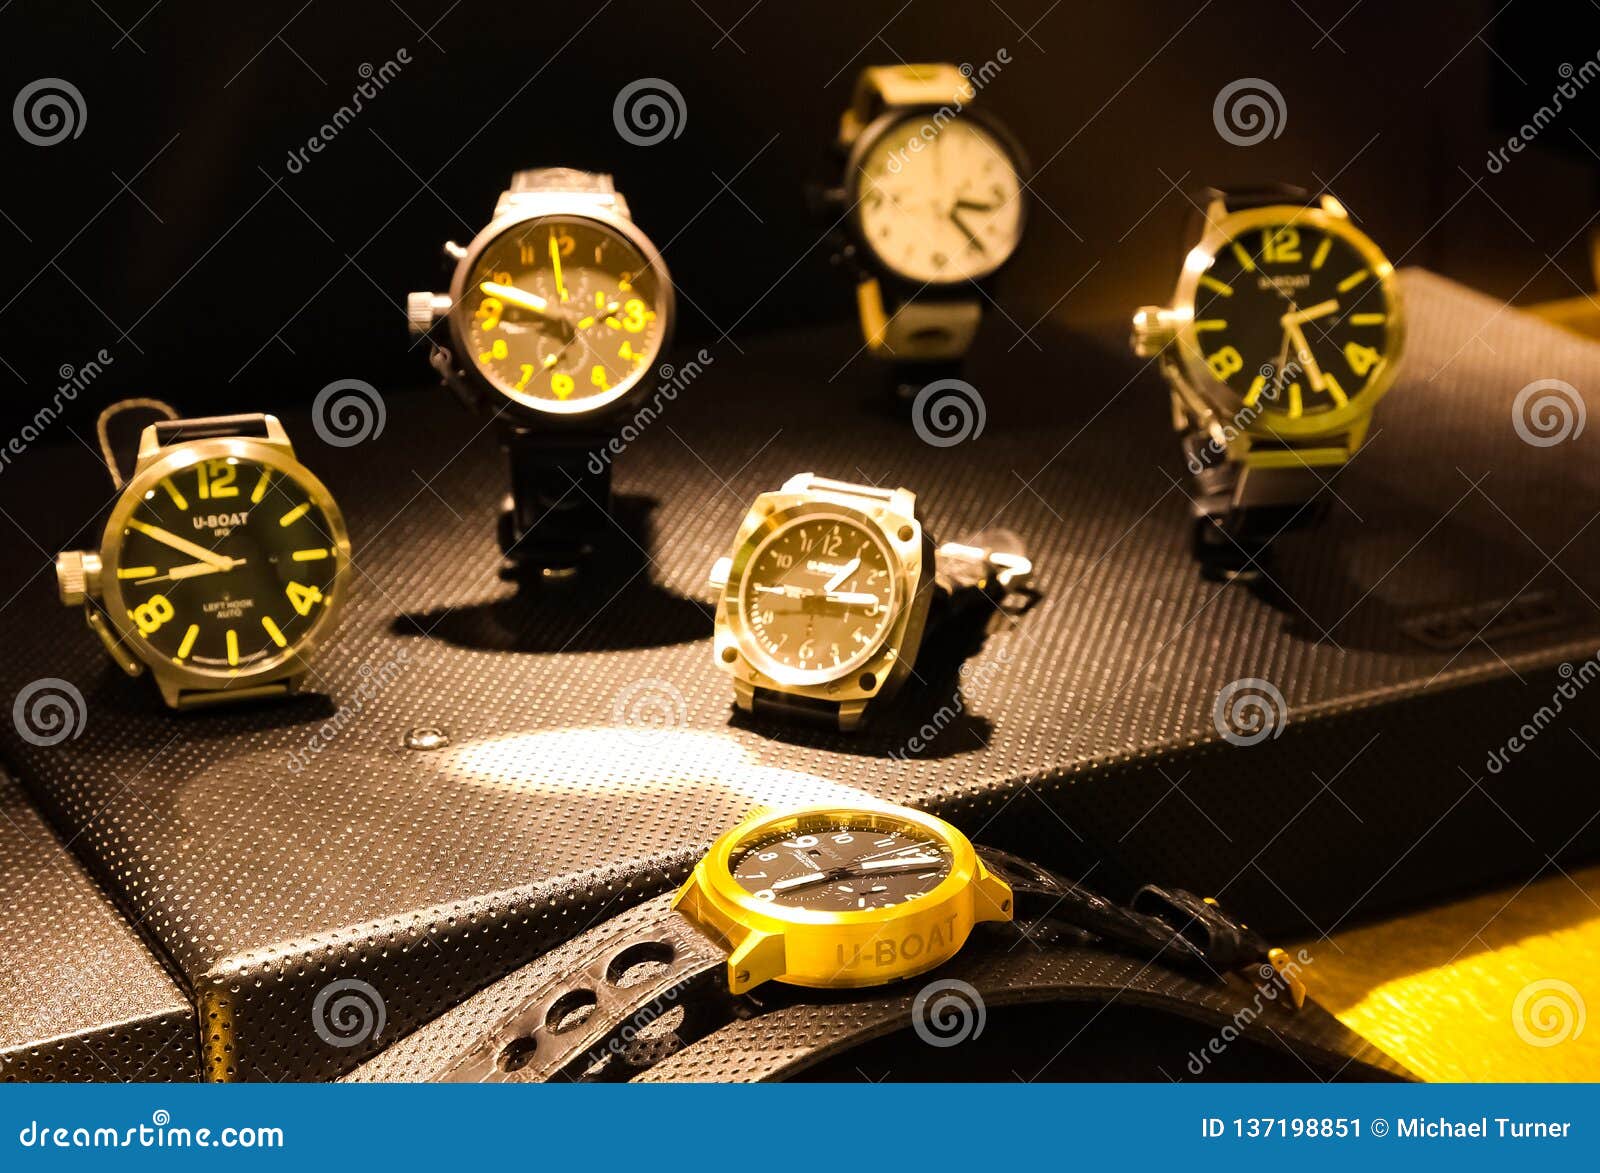 Expensive Wrist Watches on Display in Up-Market Retail Store Editorial ...